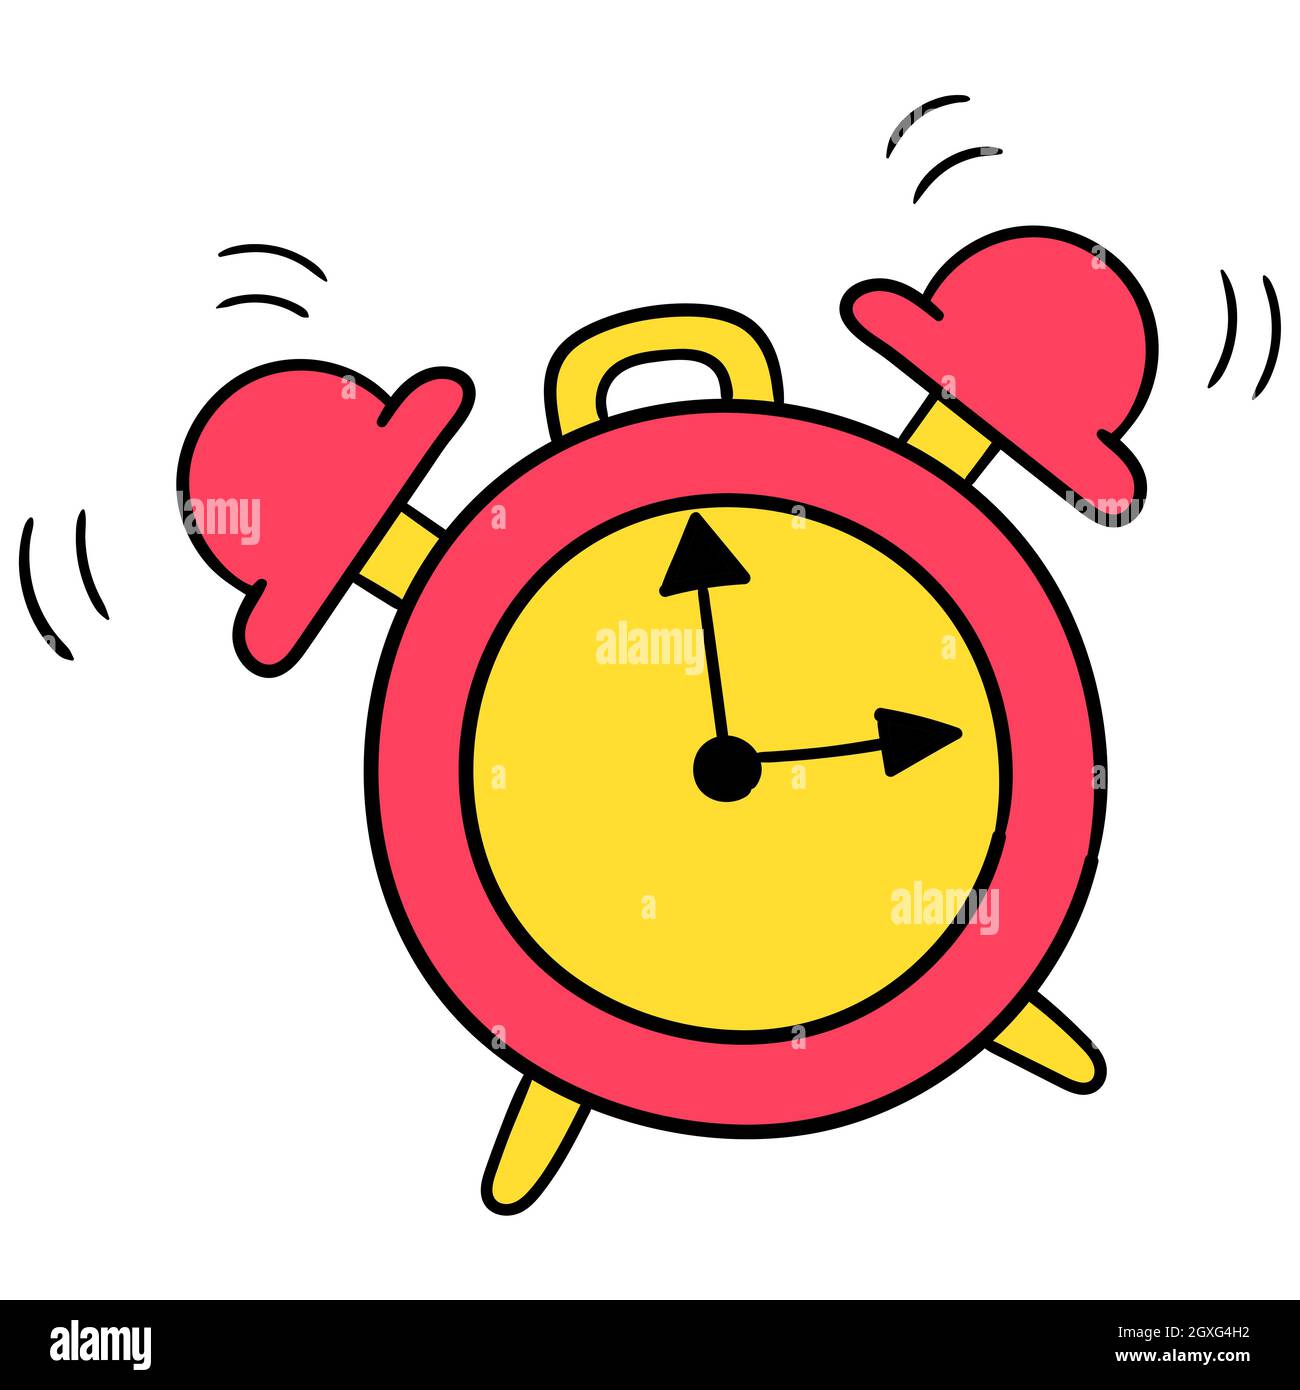 the alarm clock is ringing loudly Stock Vector